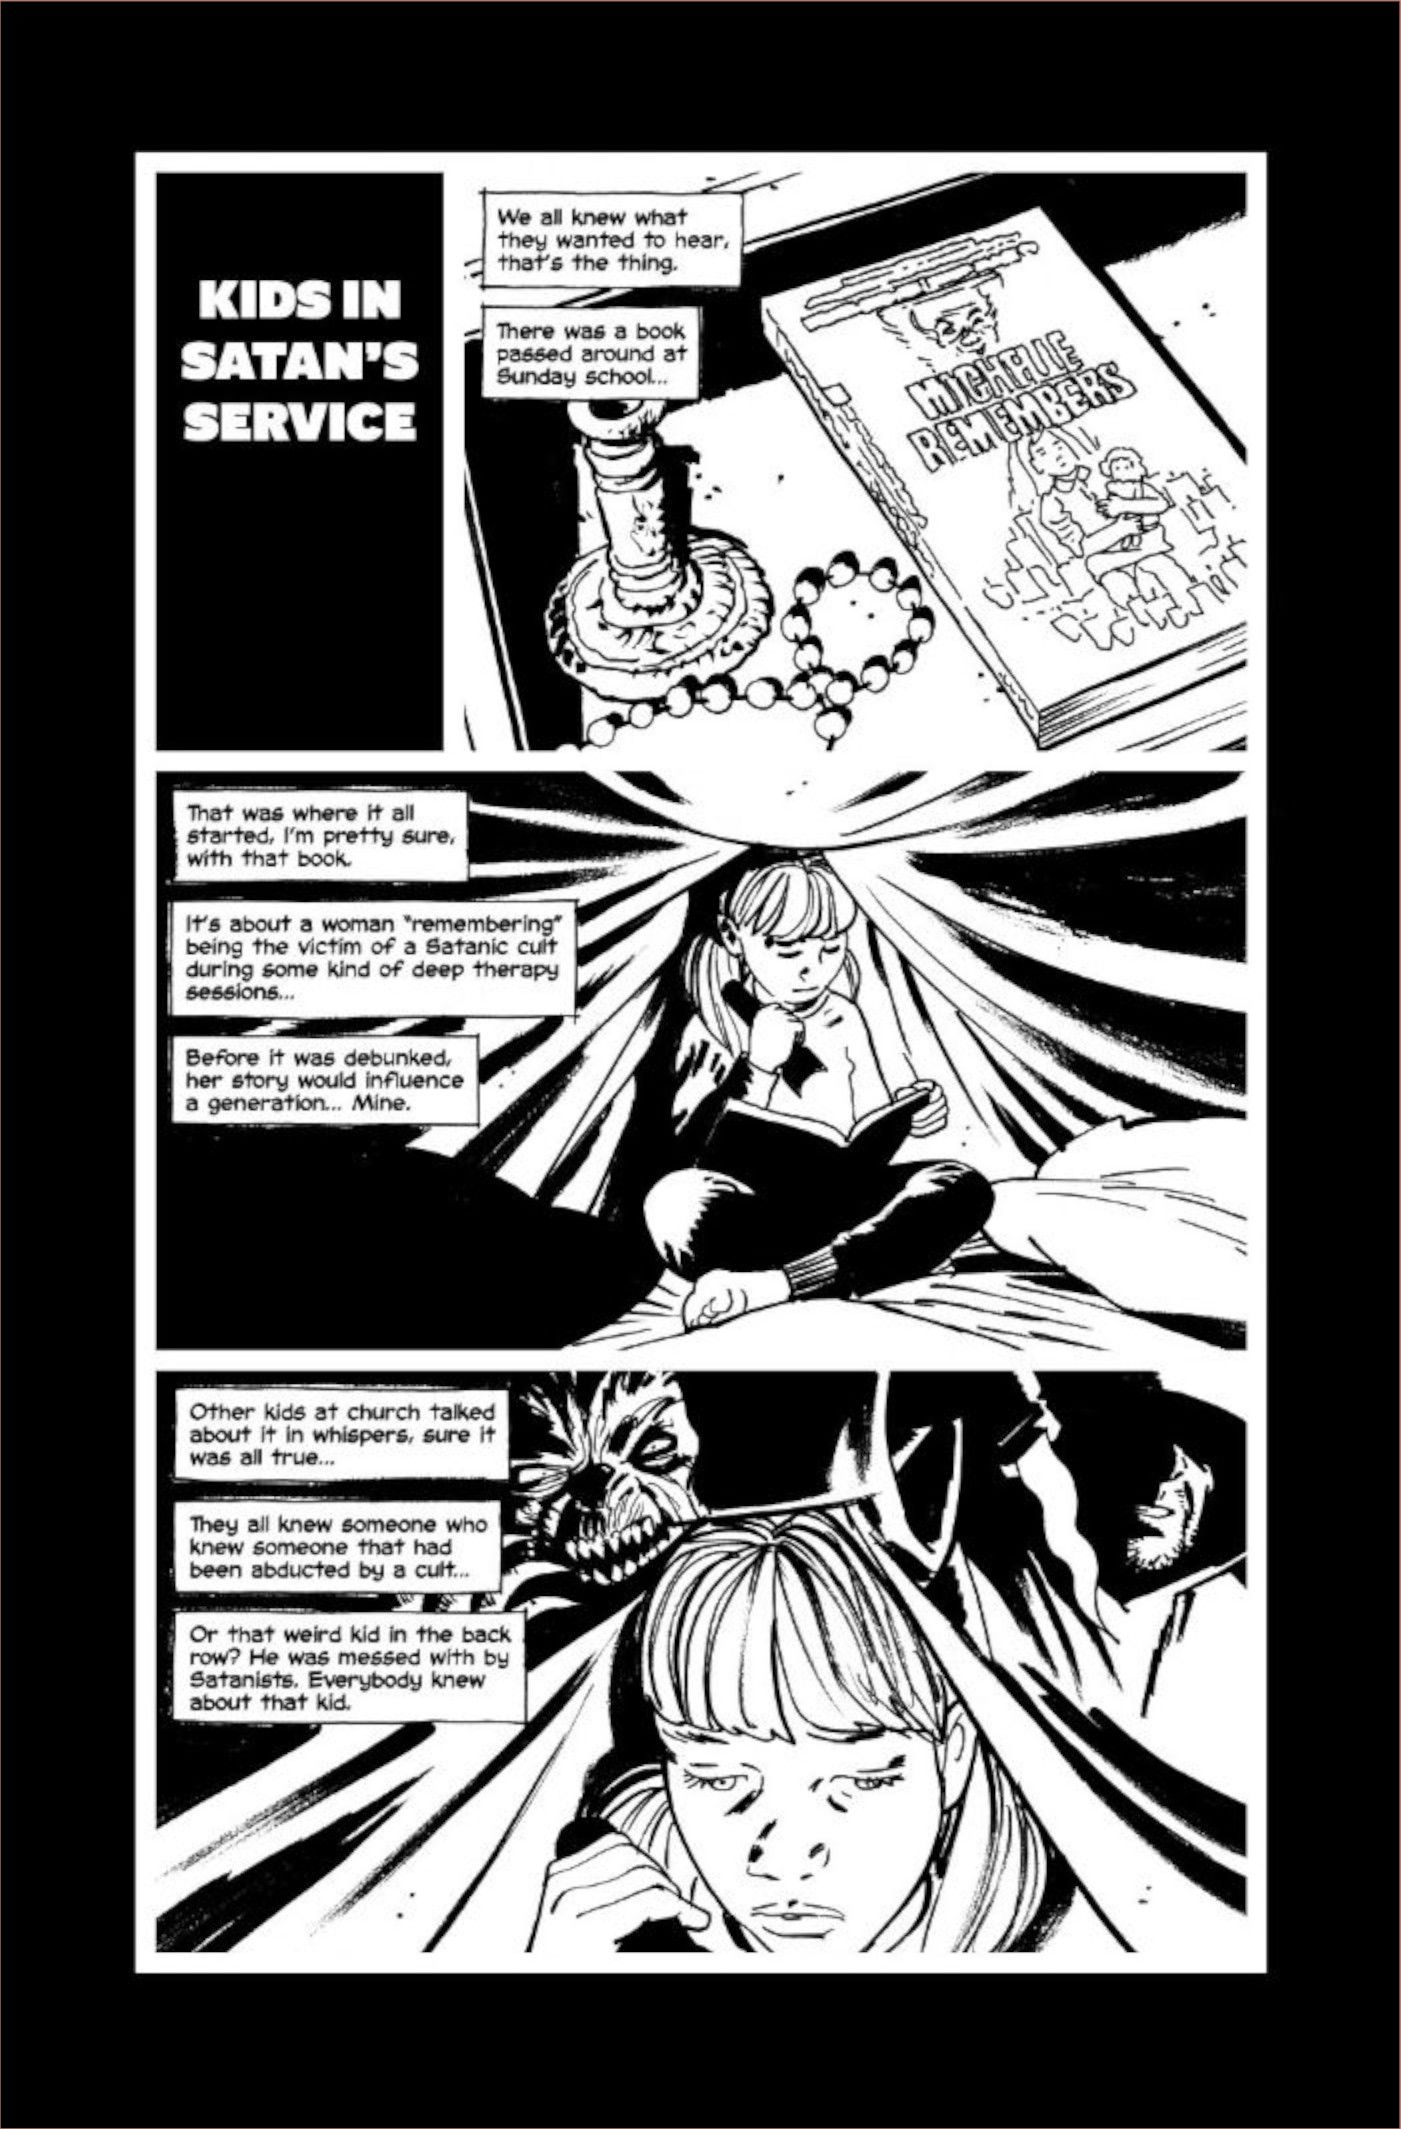 Houses of the Unholy Black and White Preview Page